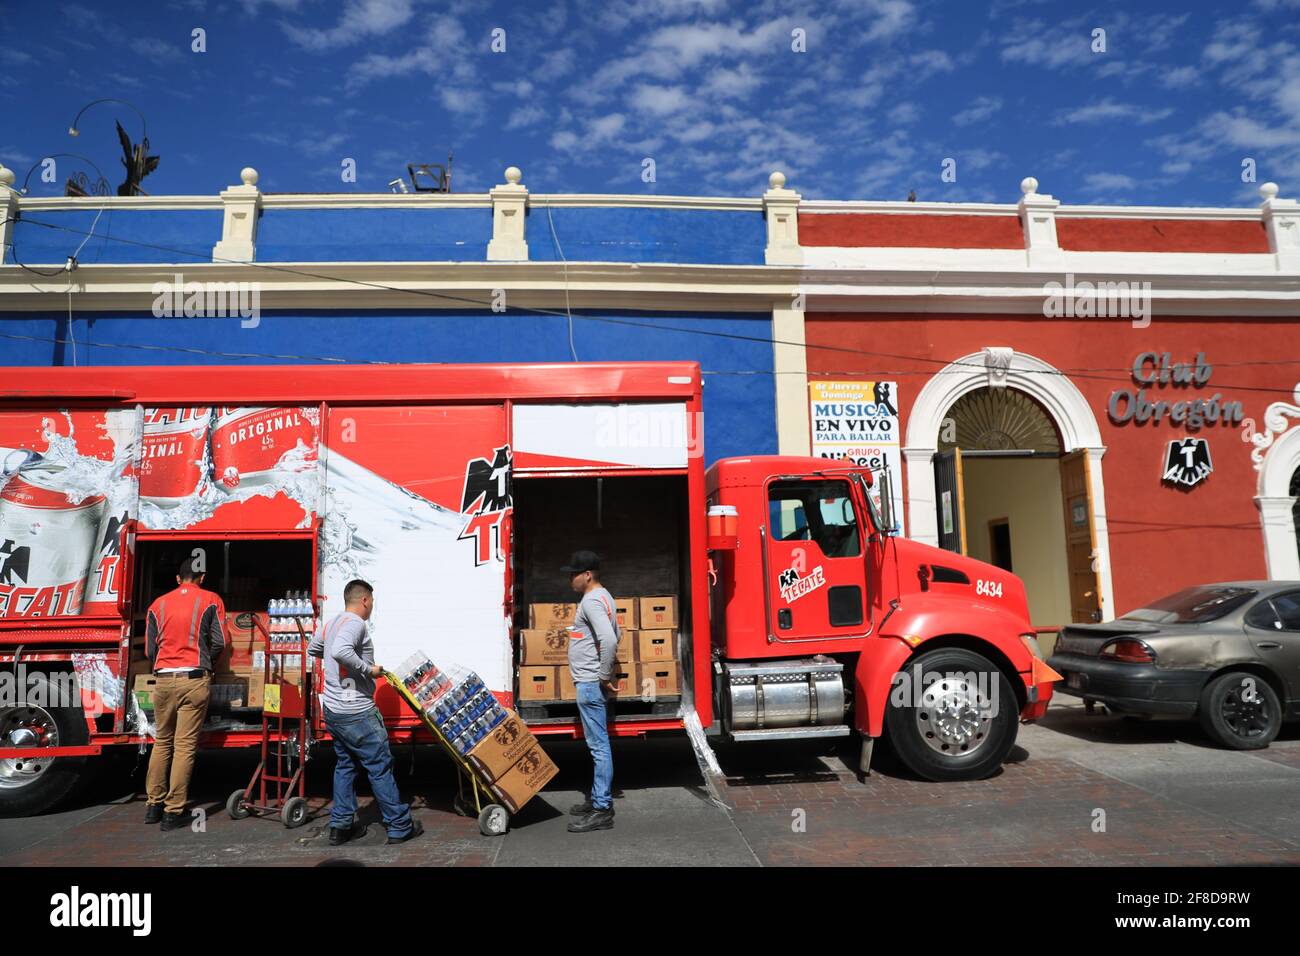 A delivery truck from the Cuatemoc Moctezuma or Tecate brewery sells cans  and cartons of beer in a blue building called Cerveceria la Barra Hidalgo  in the historic center of Hermosillo, Sonora,